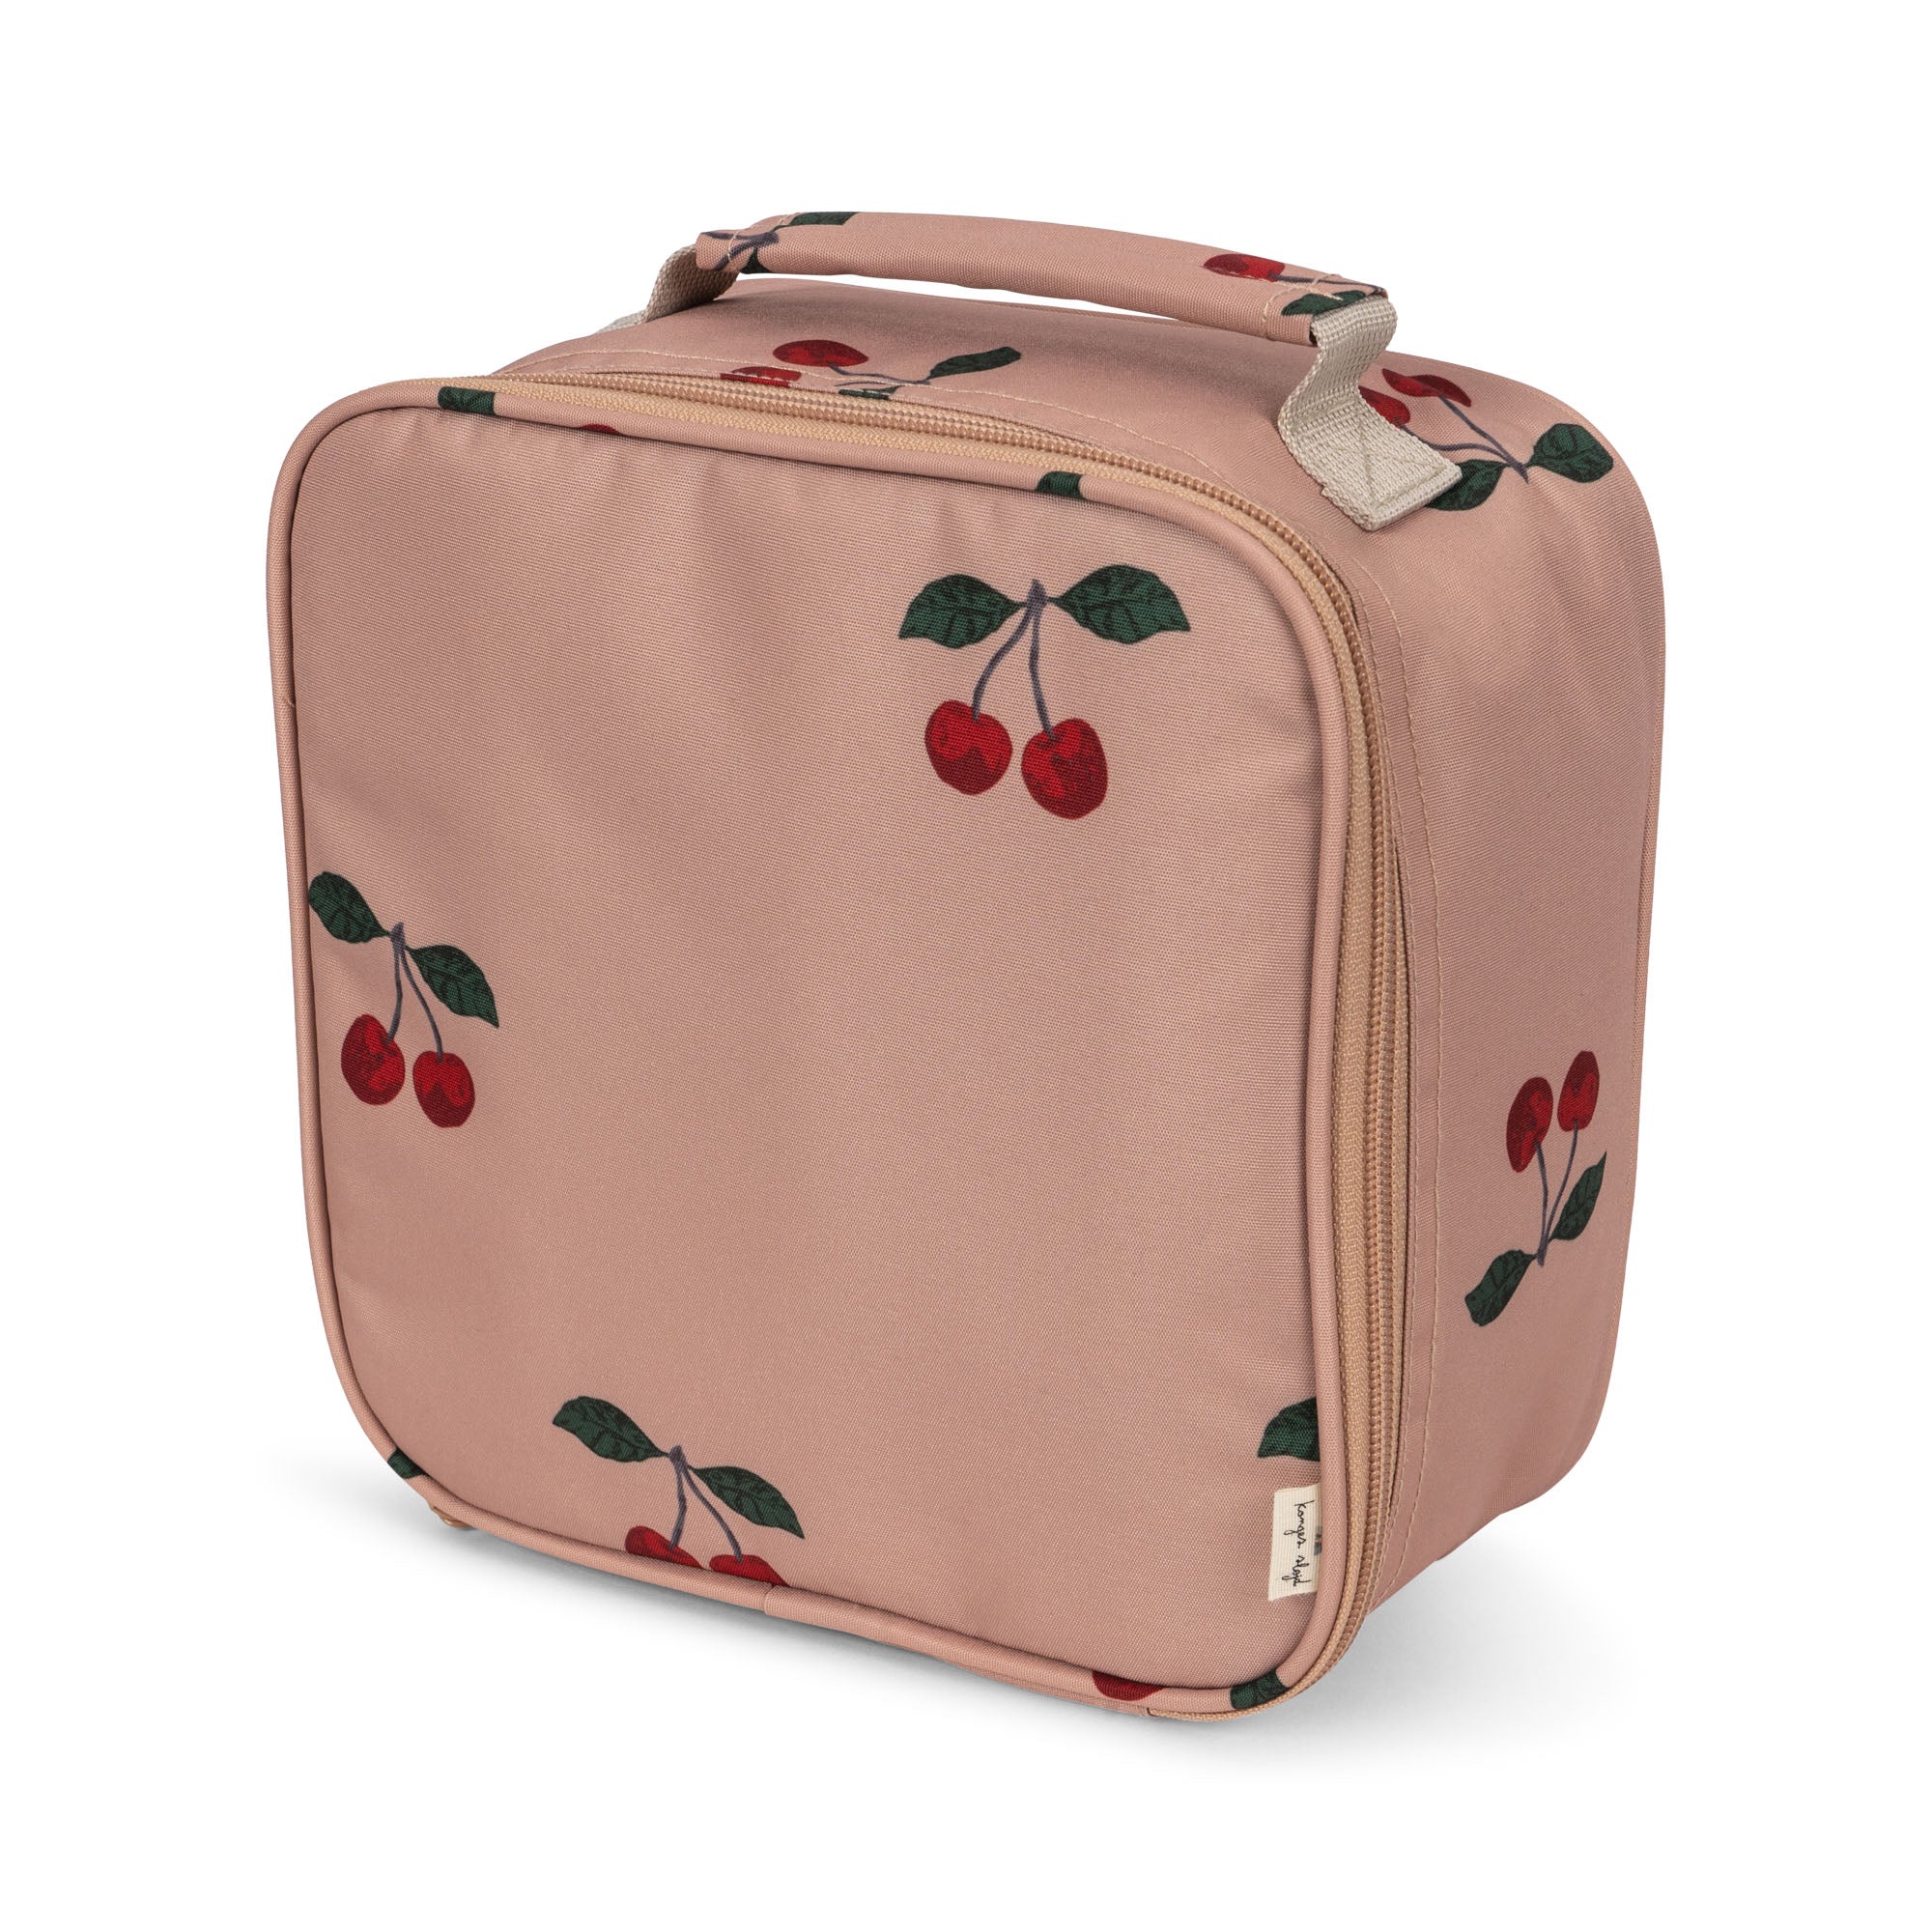 Konges Sløjd A/S CLOVER THERMO LUNCH BAG Thermo bags MA GRANDE CERISE MAHOGANY